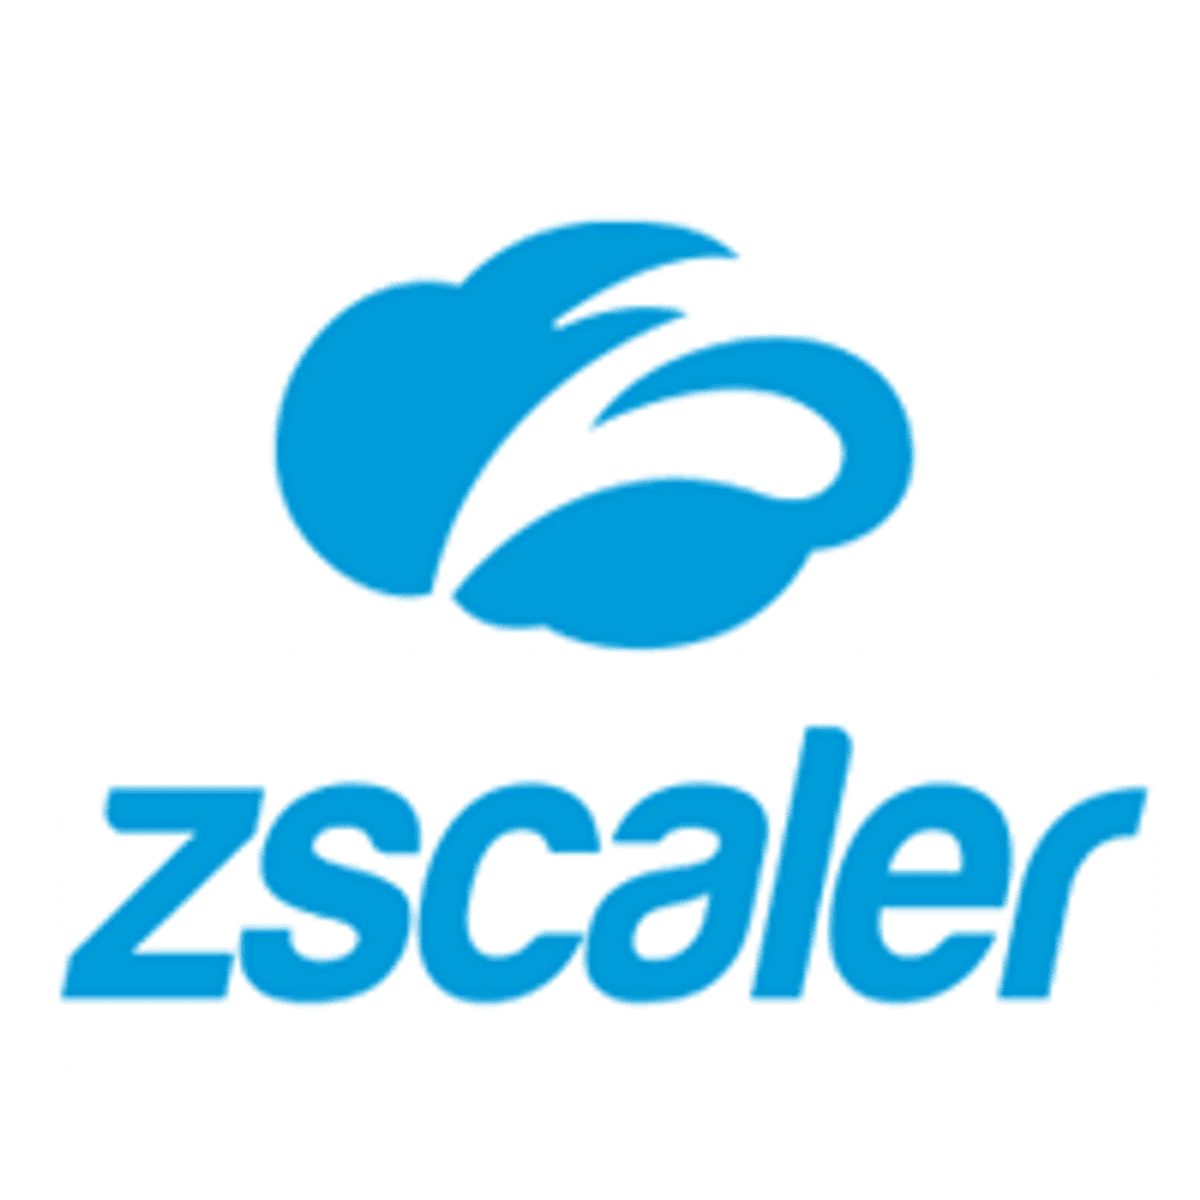 Zscaler Zenith Live image